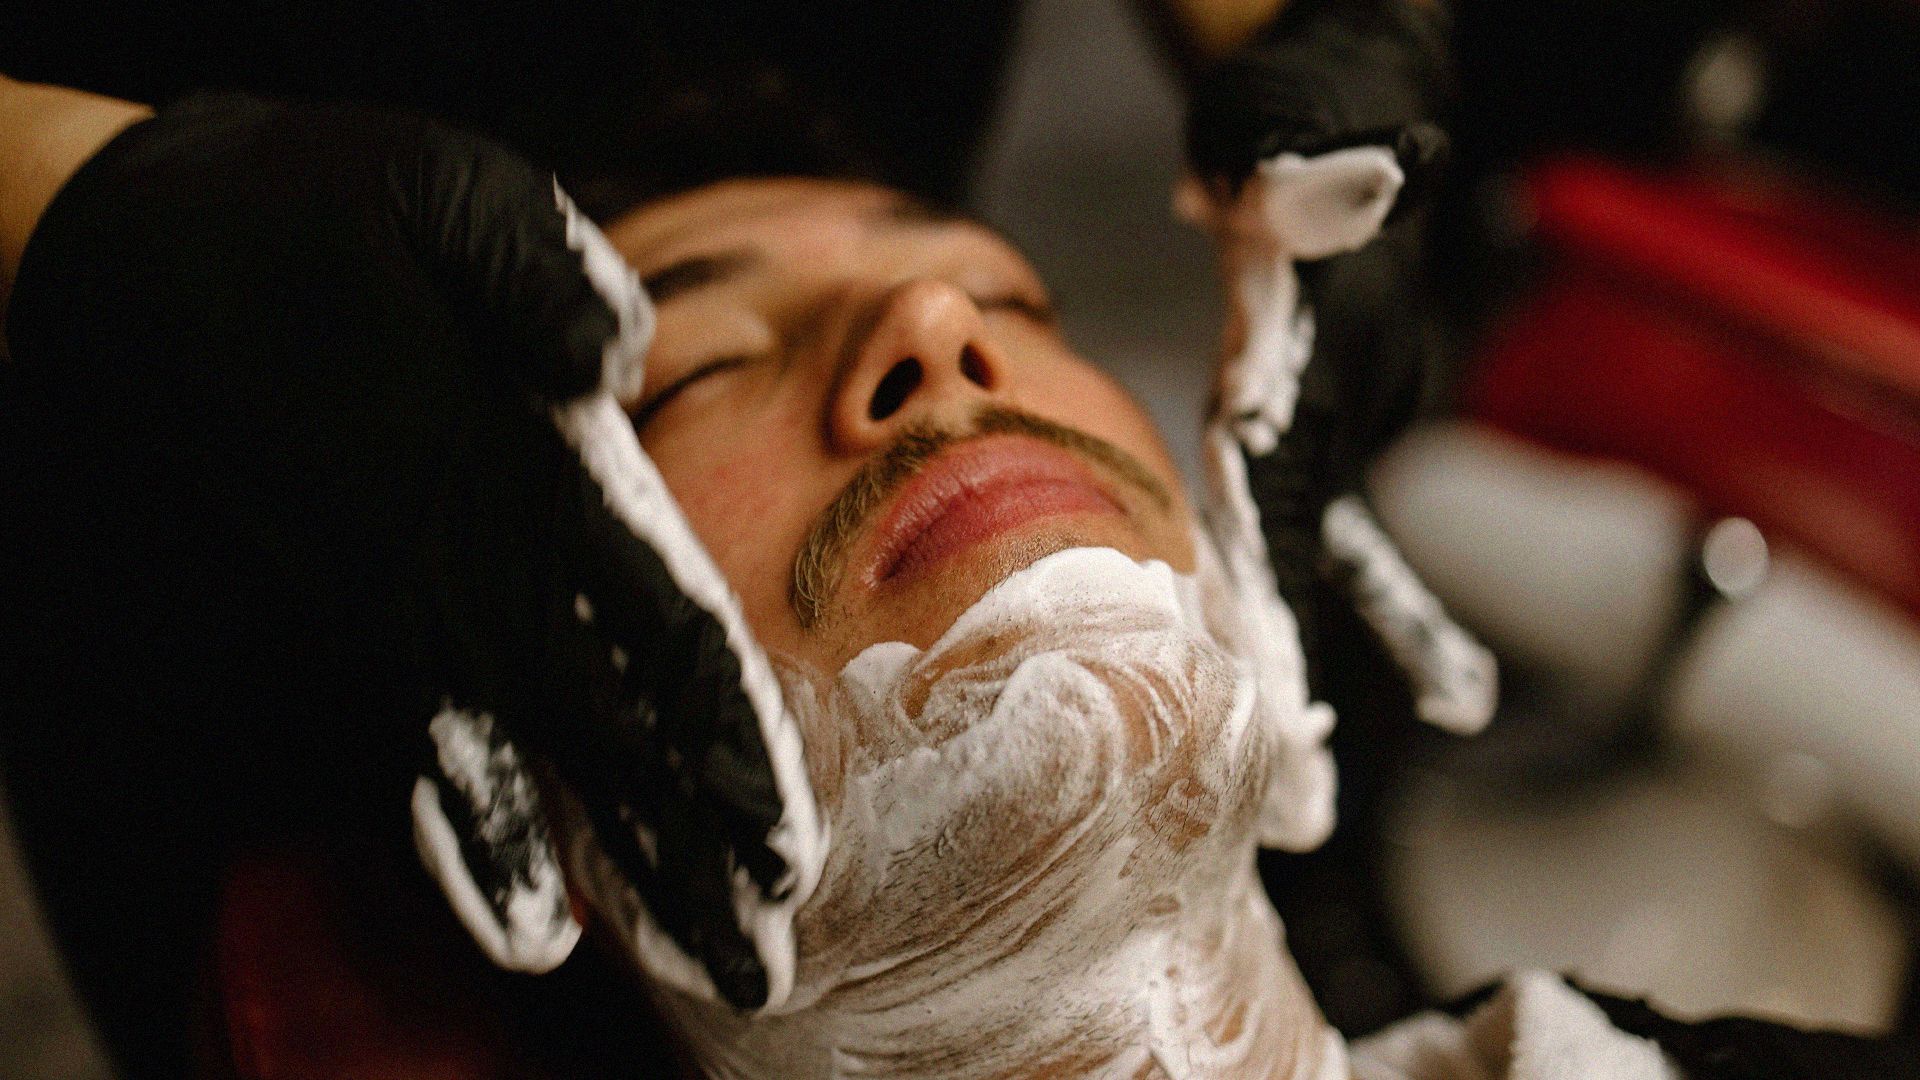 A man relaxes with his eyes closed. A barber smooths shaving cream on his face.